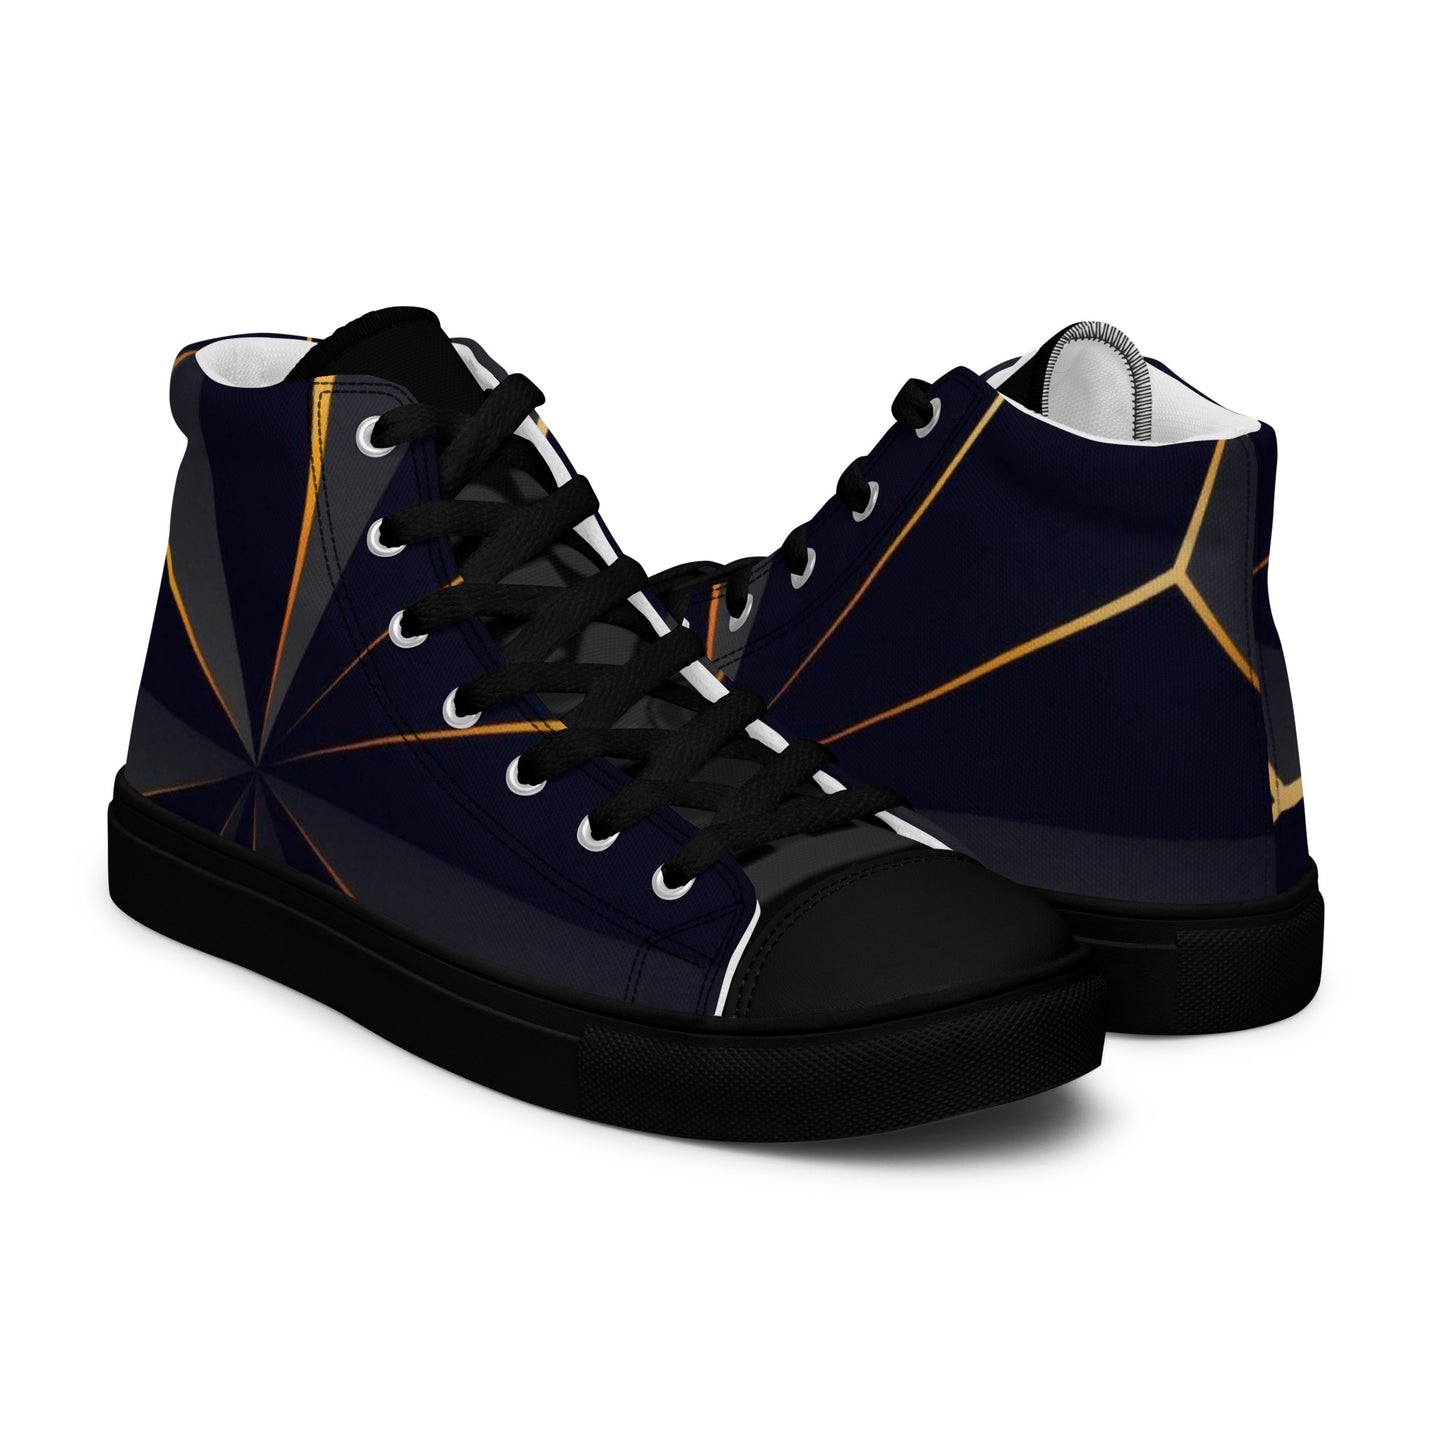 Get trendy with BlackMars Men’s high top trainers -  available at BlackMars . Grab yours for £64.99 today!